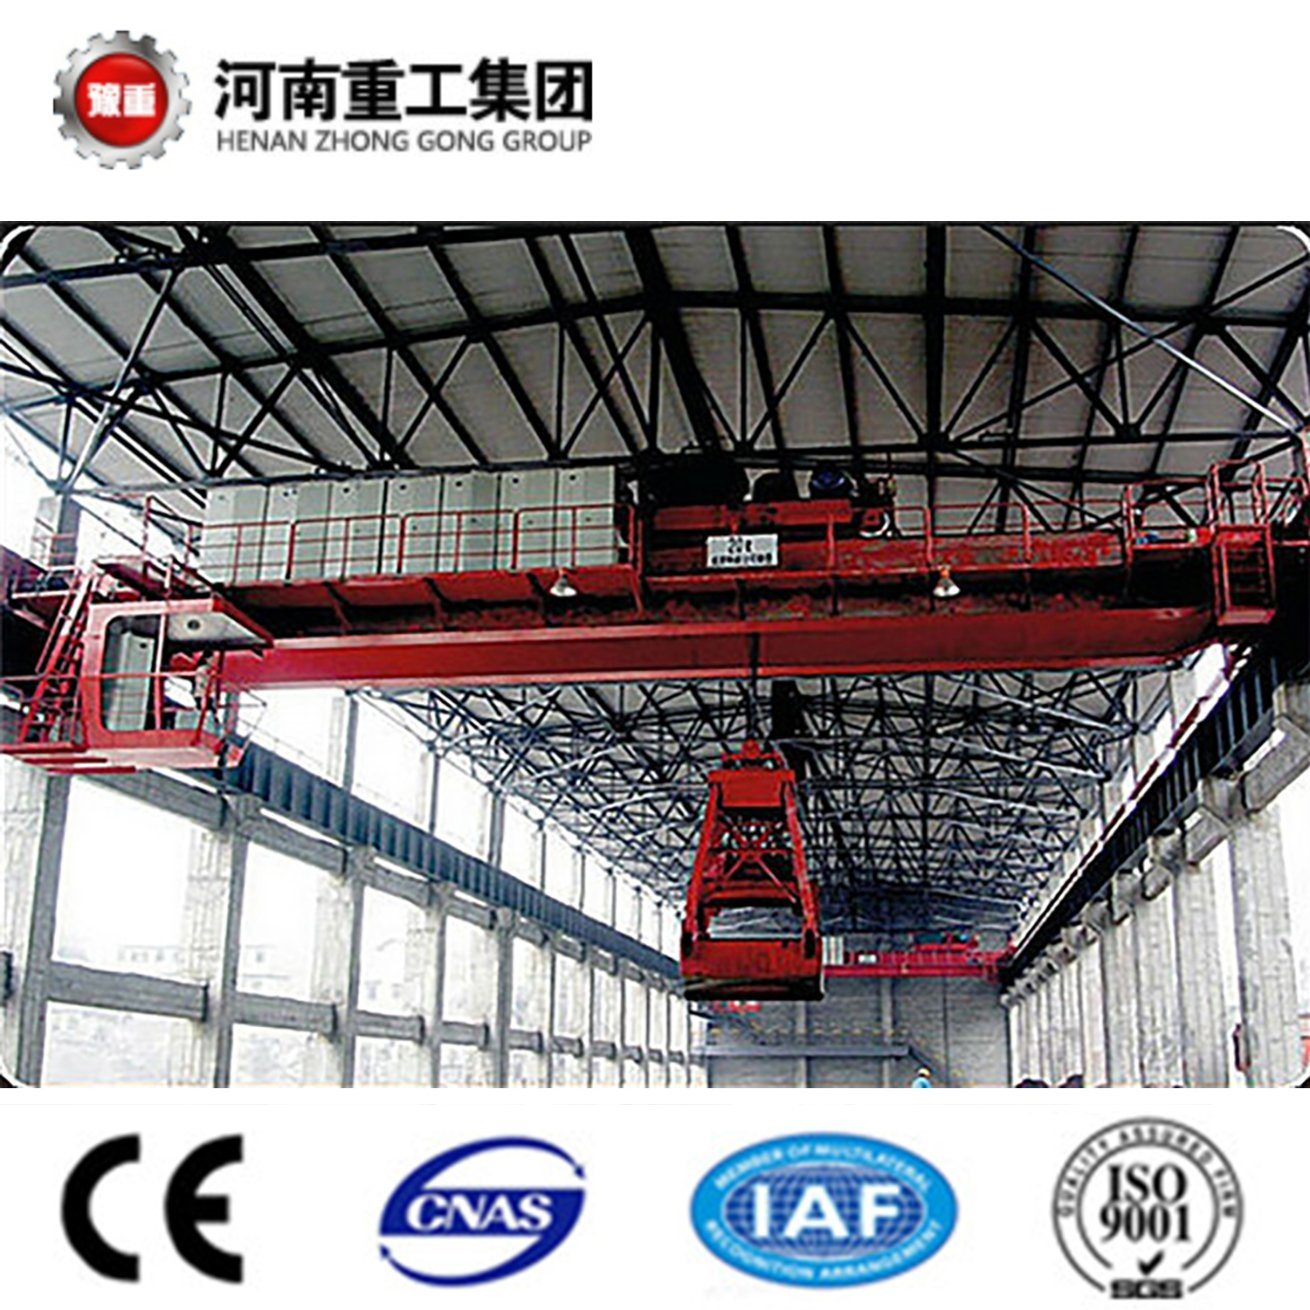 
                Suitable to Working Temperature High to 50 degree centigrade Grab Overhead Traveling Crane for Coal Grabbing in Cement Plant
            